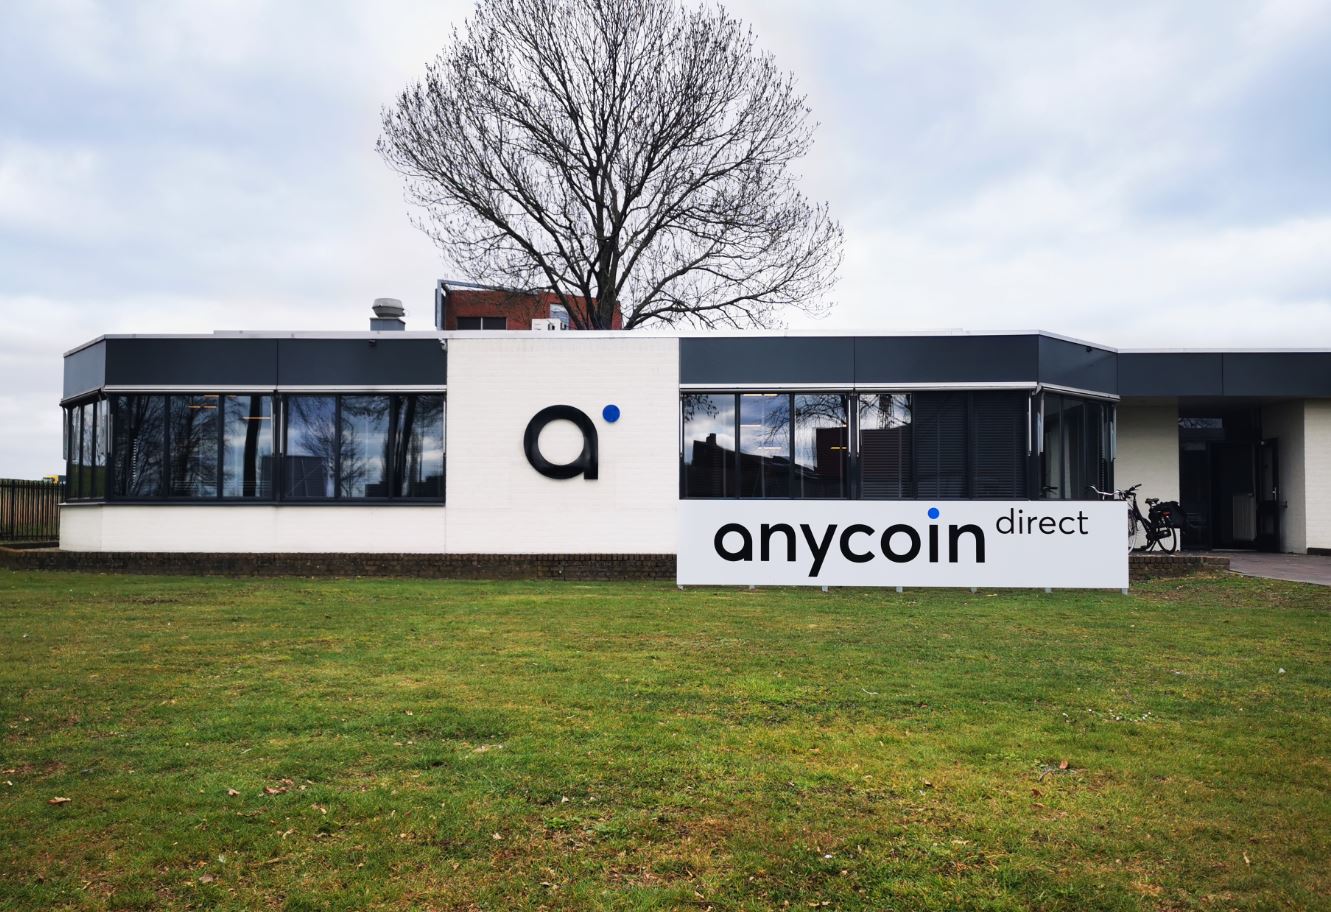 anycoin direct building